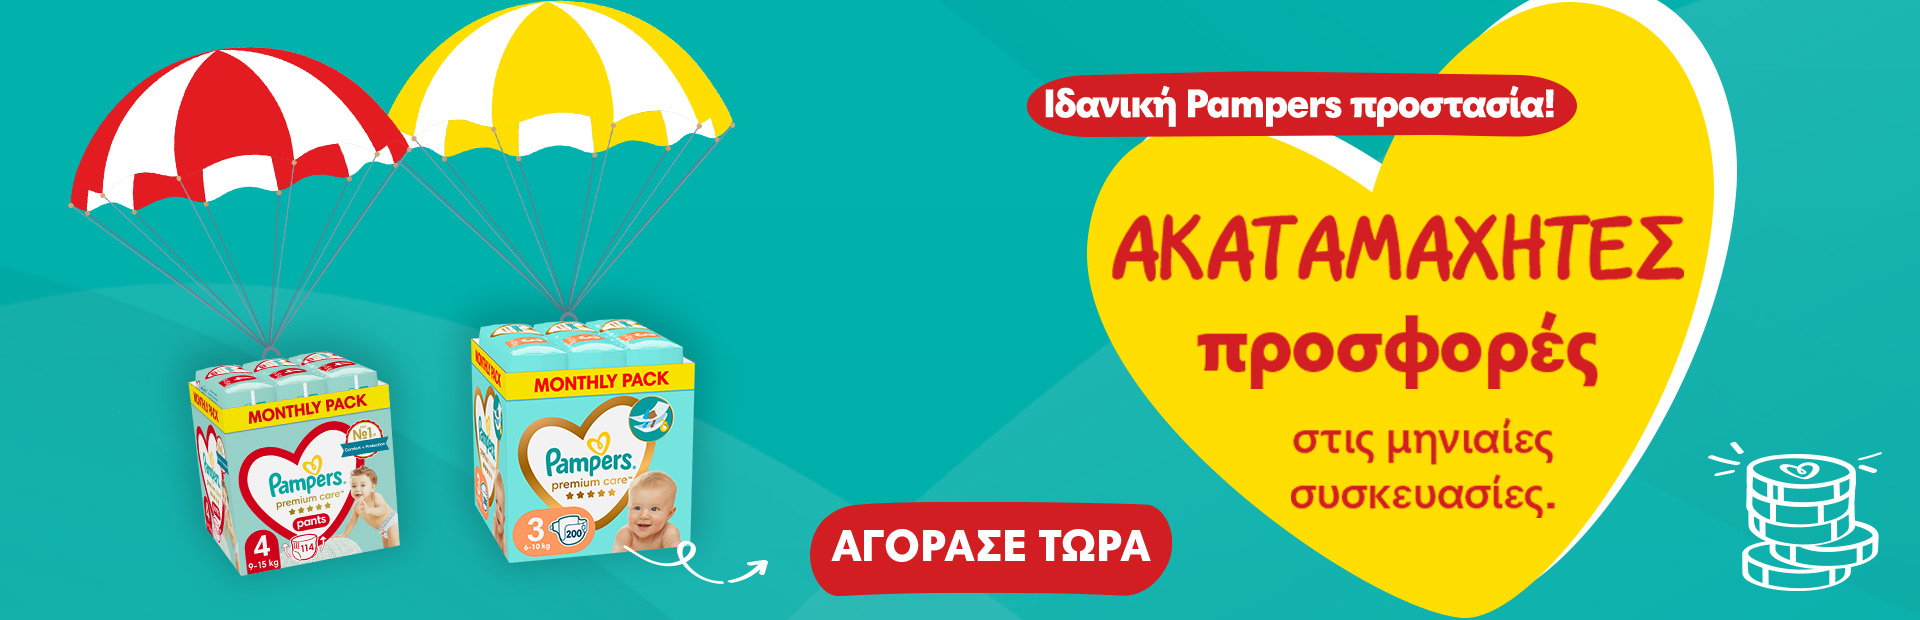 Pampers monthly promo